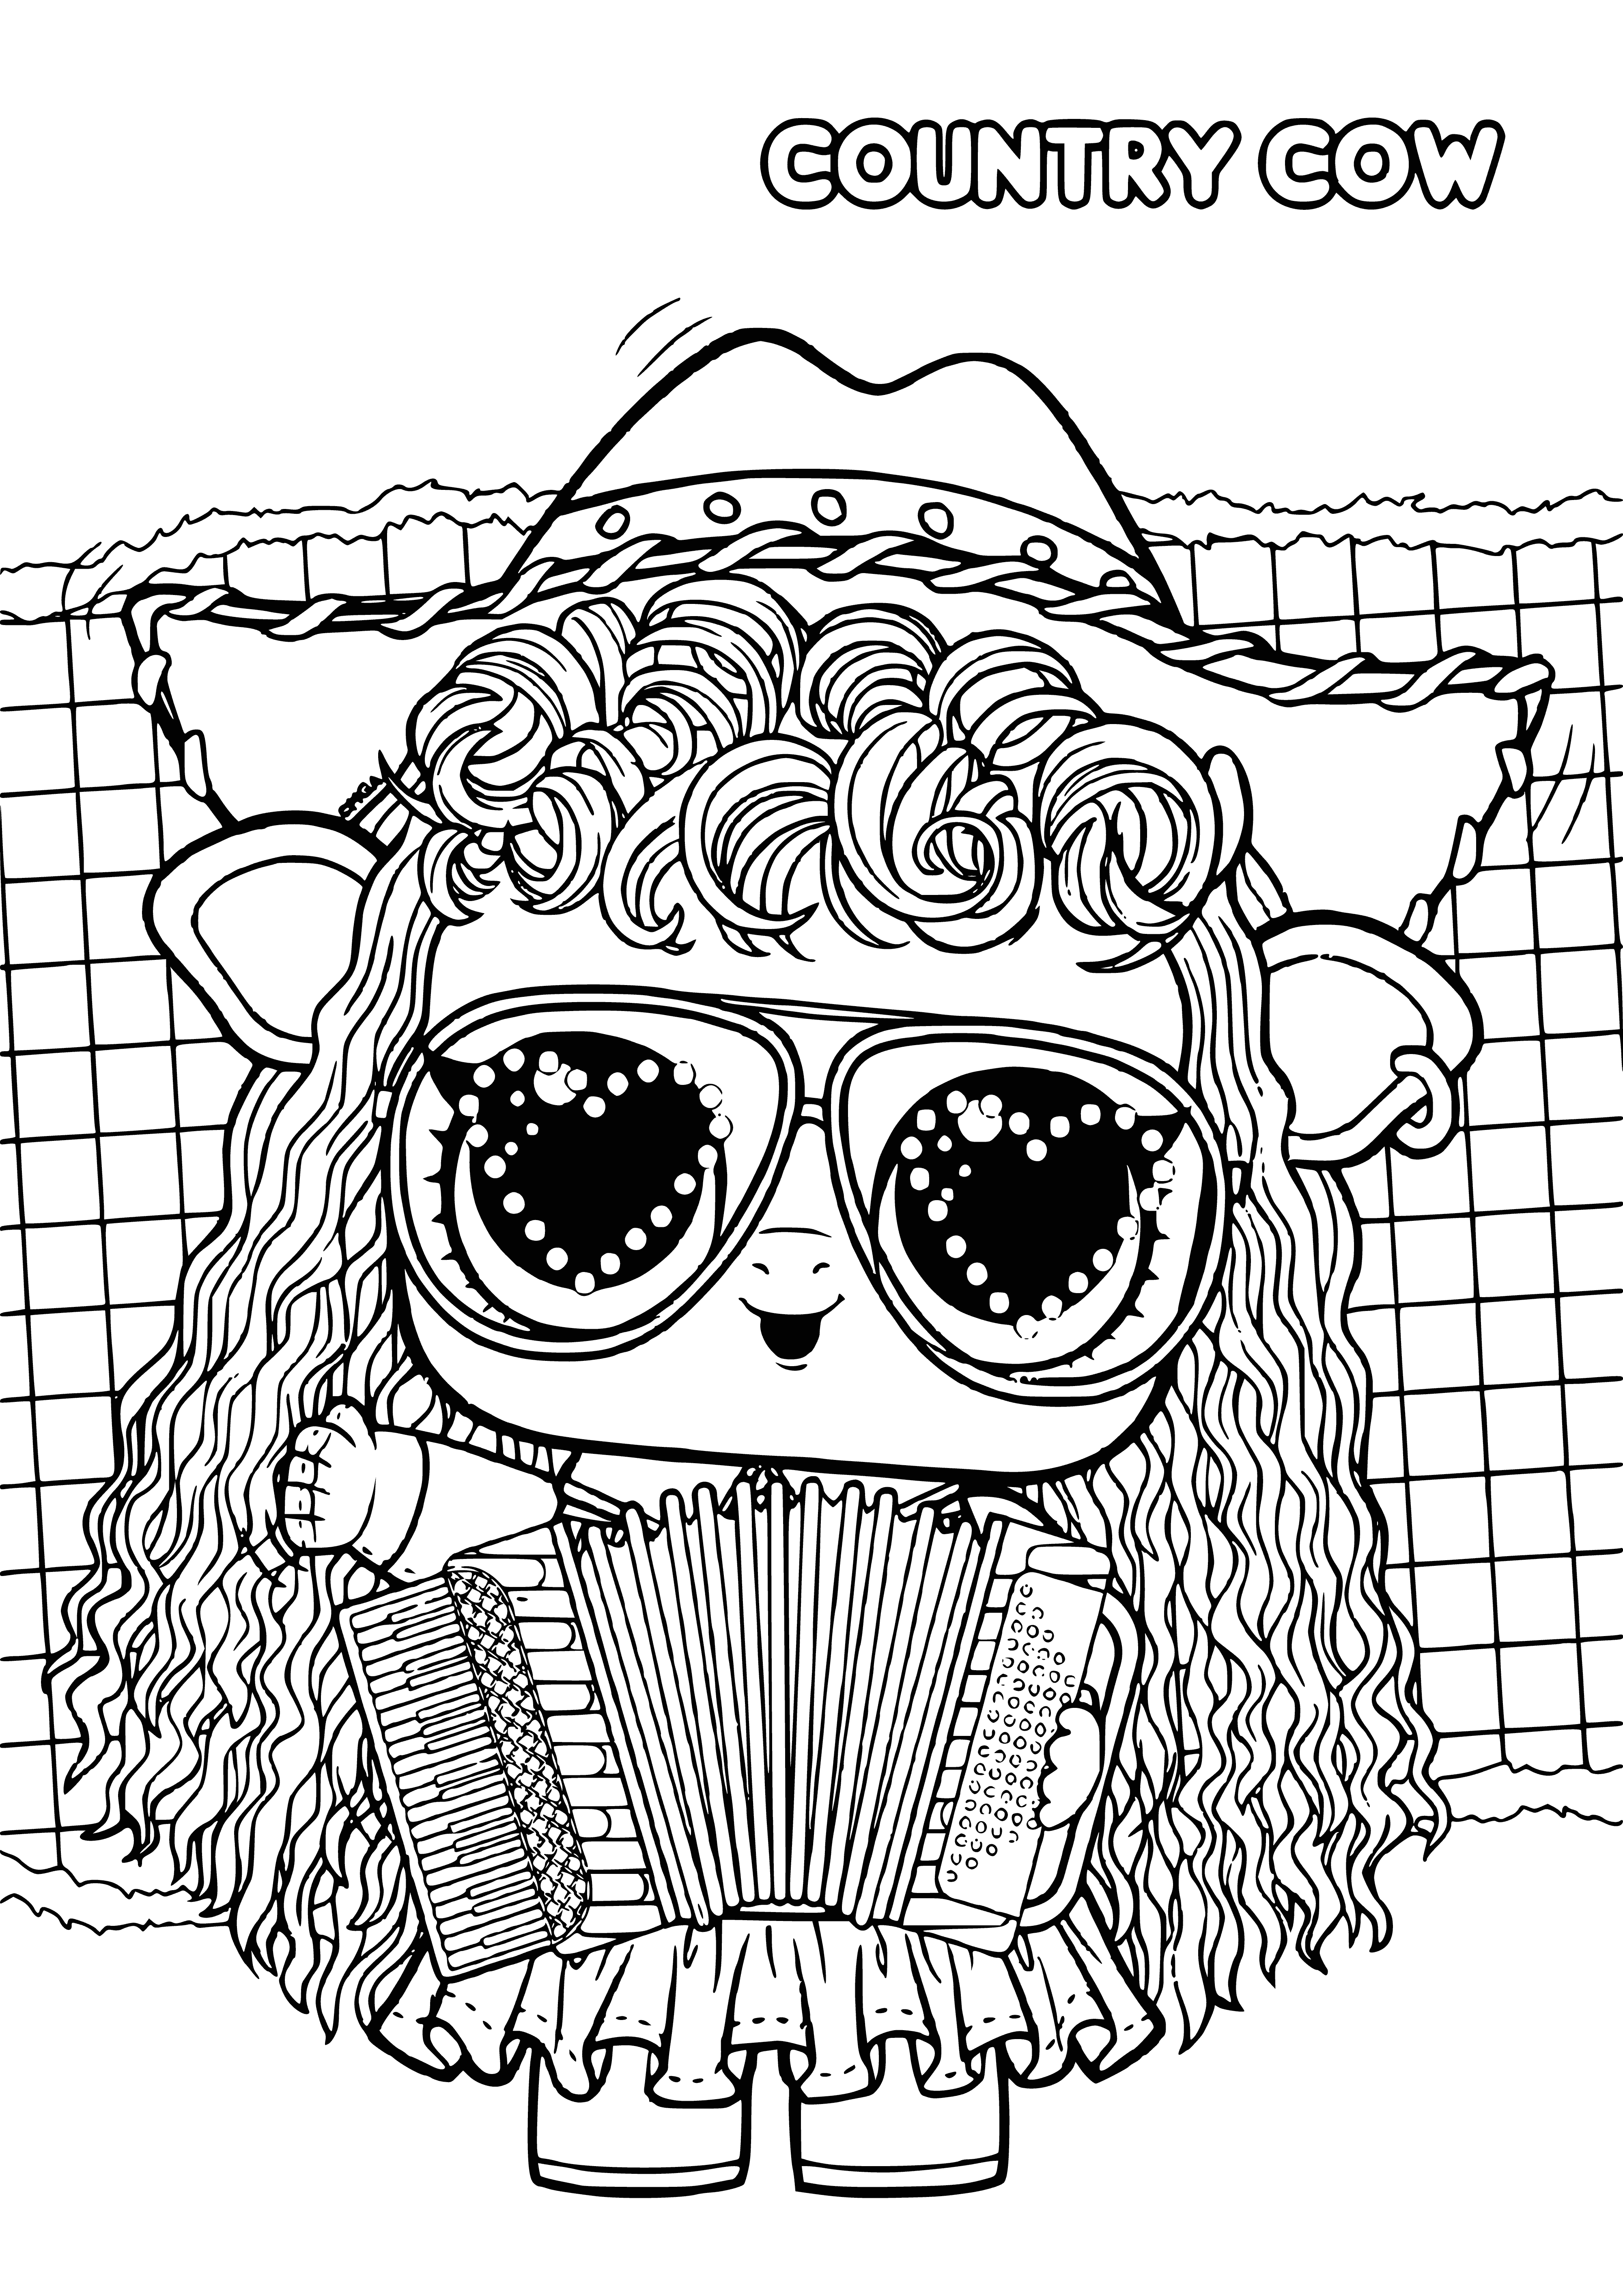 coloring page: Cute spotted toy cow with bell, checkered bandana & surprised expression - the LOL Pet Country Cow!